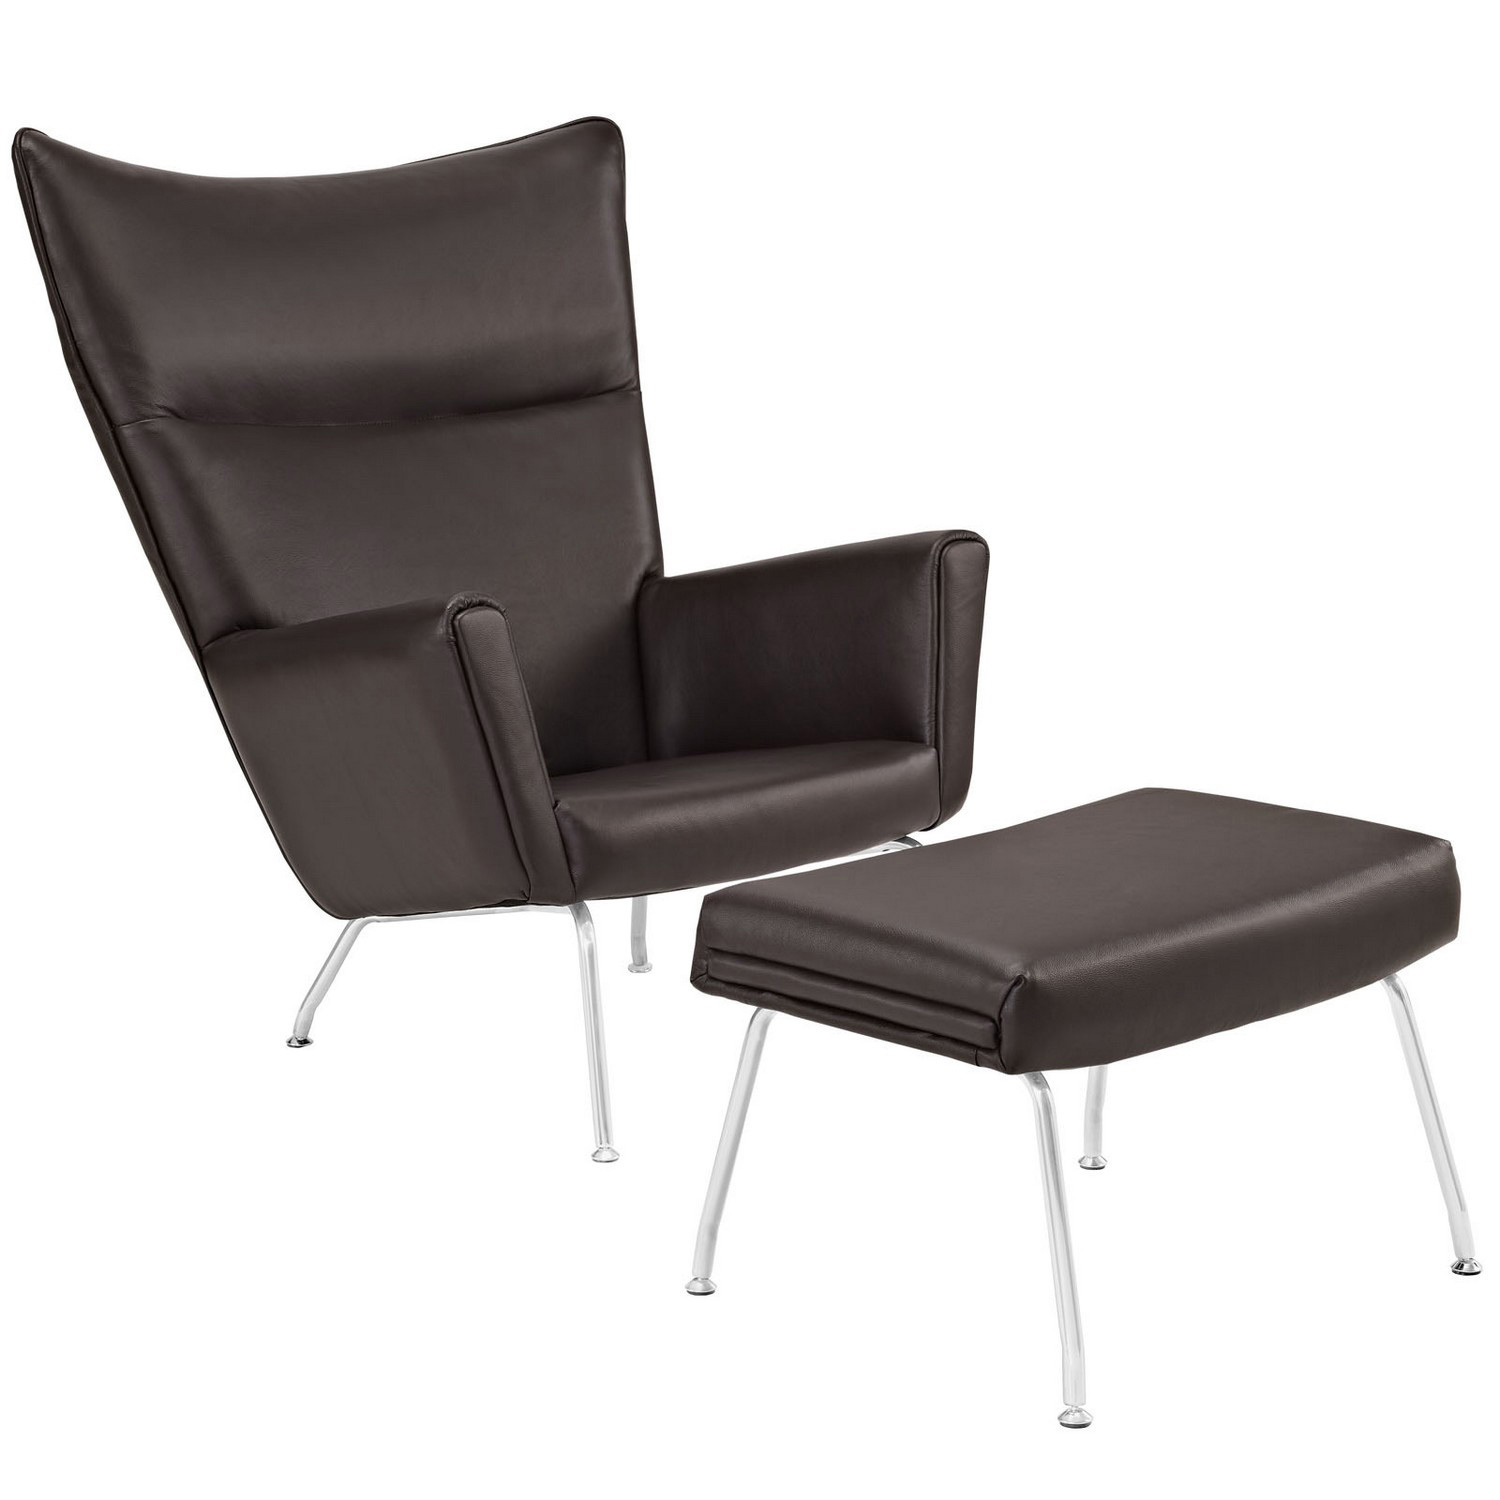 Modway Class Leather Lounge Chair - Dark Brown